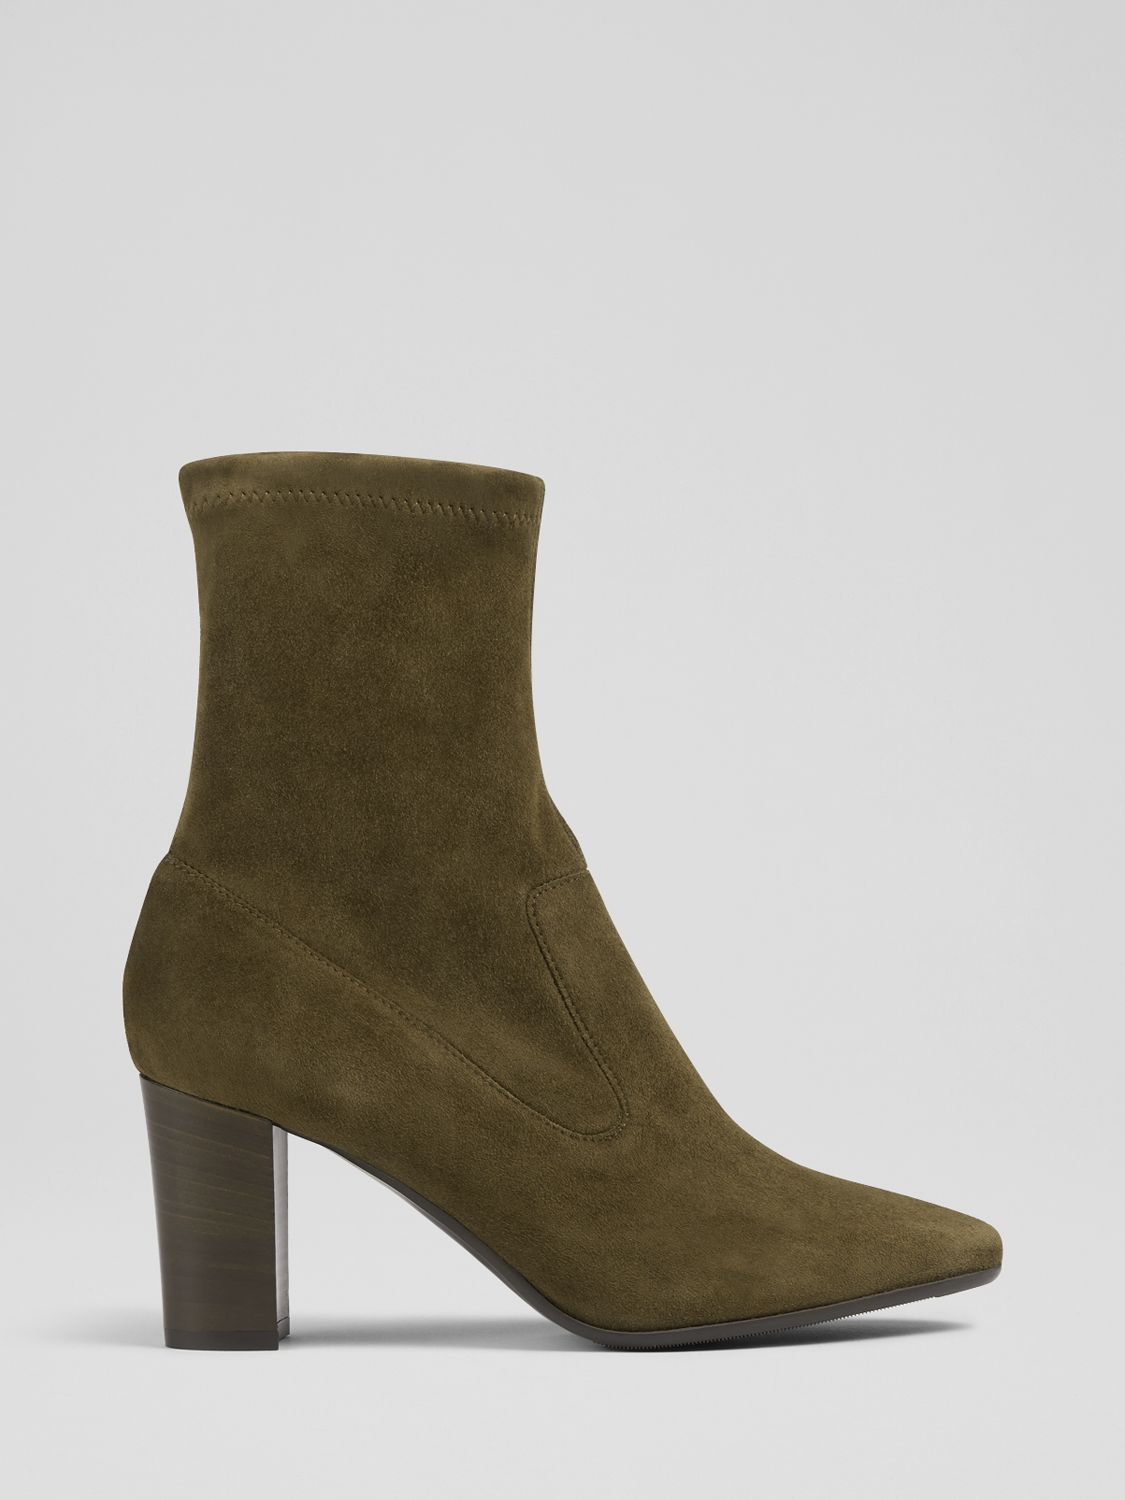 L.K.Bennett Alice Suede Ankle Boots, Olive, 2